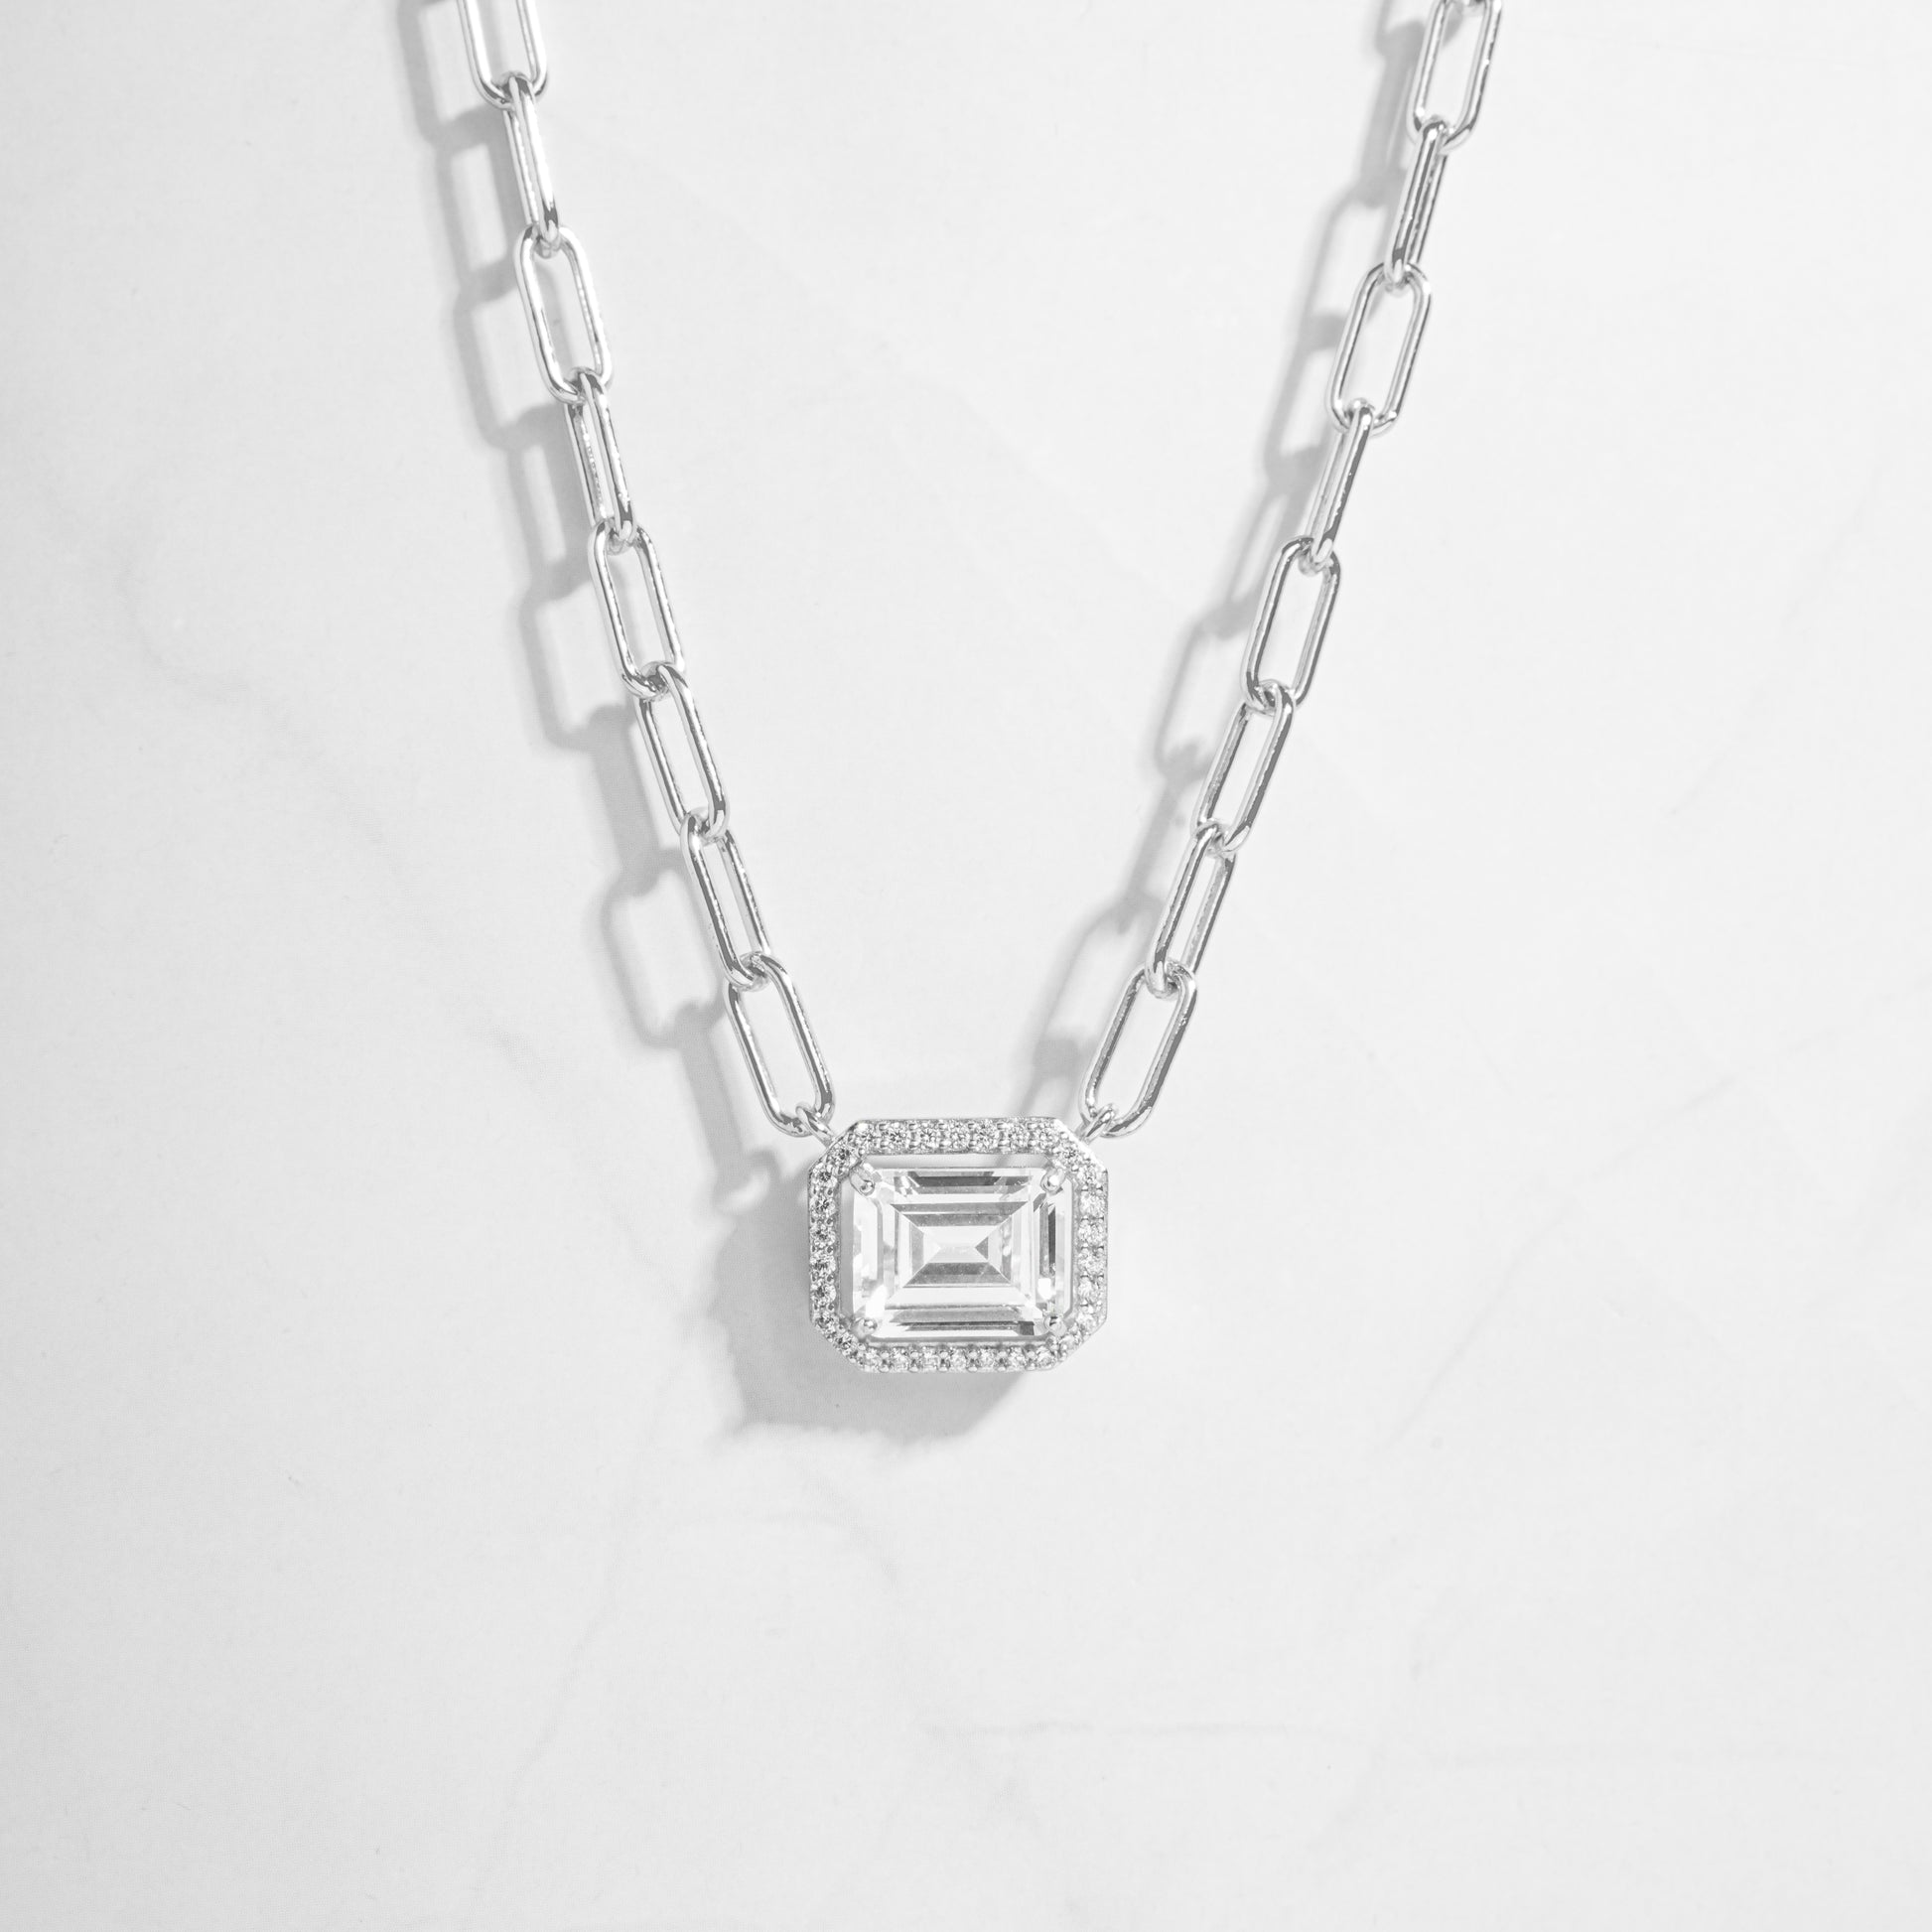 a necklace with a baguette pendant on a chain